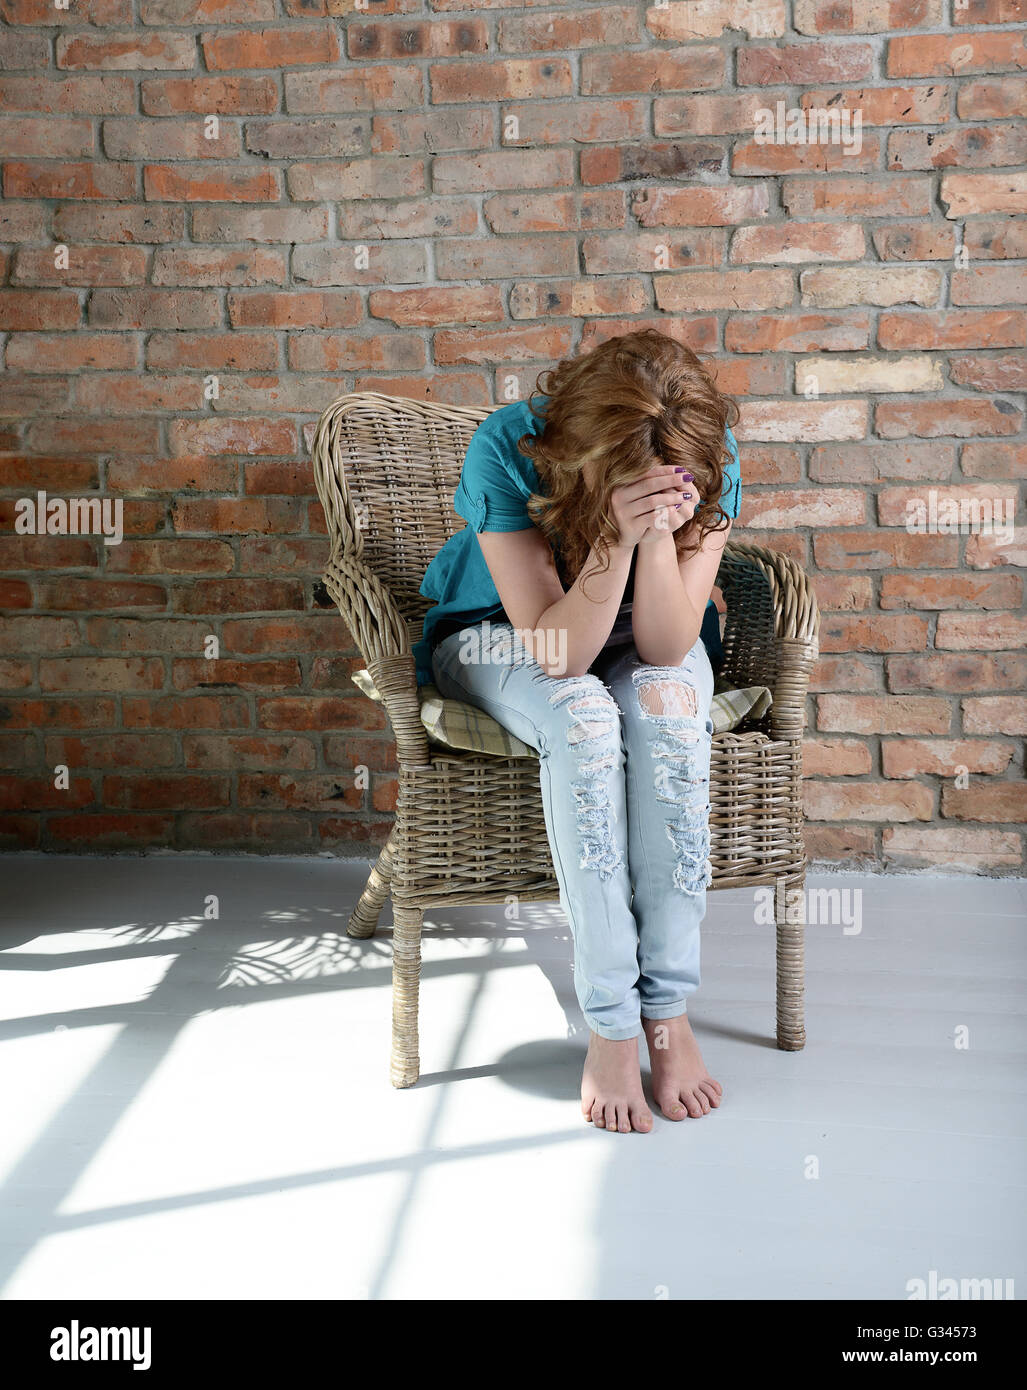 woman sitting on the chair in depression Stock Photo